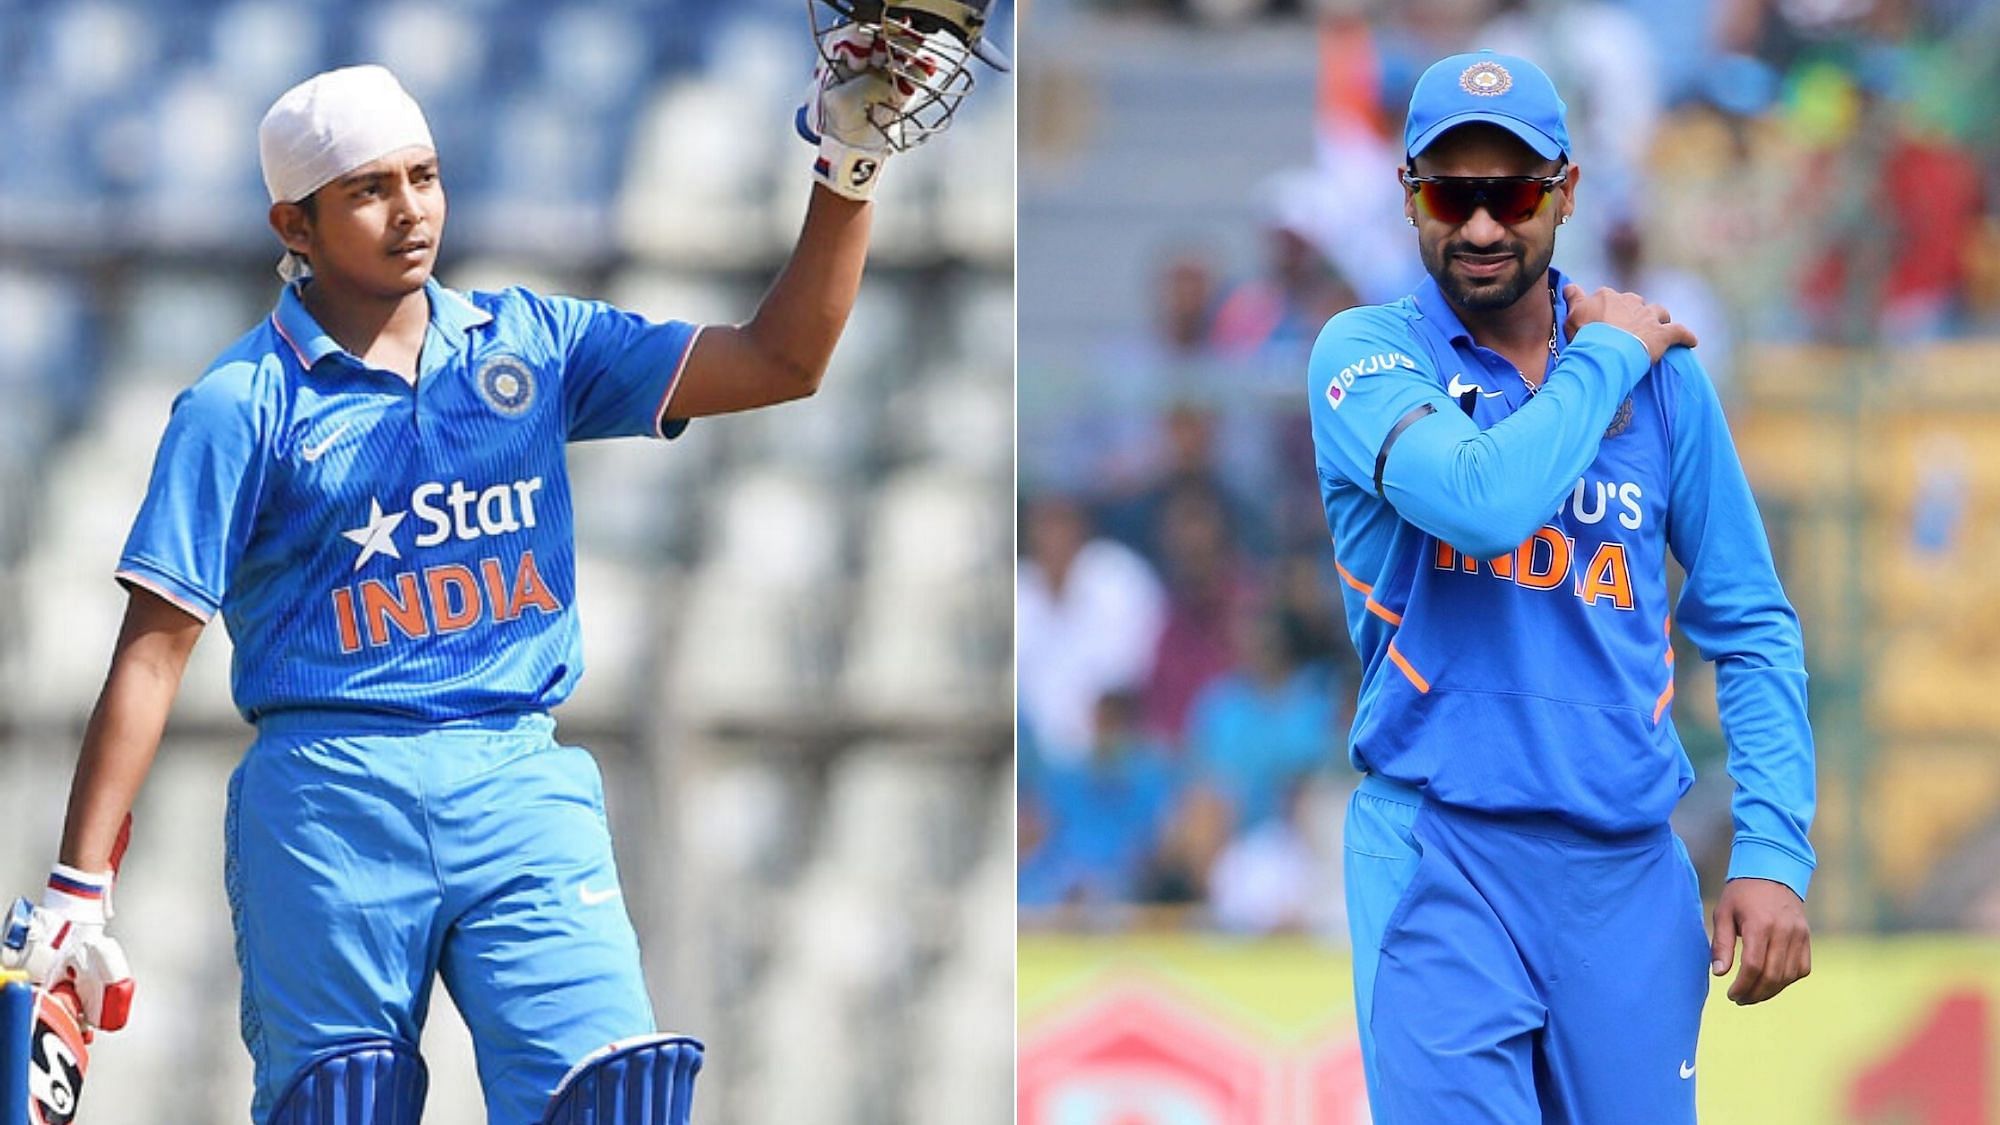 The All-India Senior Selection Committee has named Prithvi Shaw as Shikhar Dhawan’s replacement in the ODI series, and Sanju Samson for the T20I series.